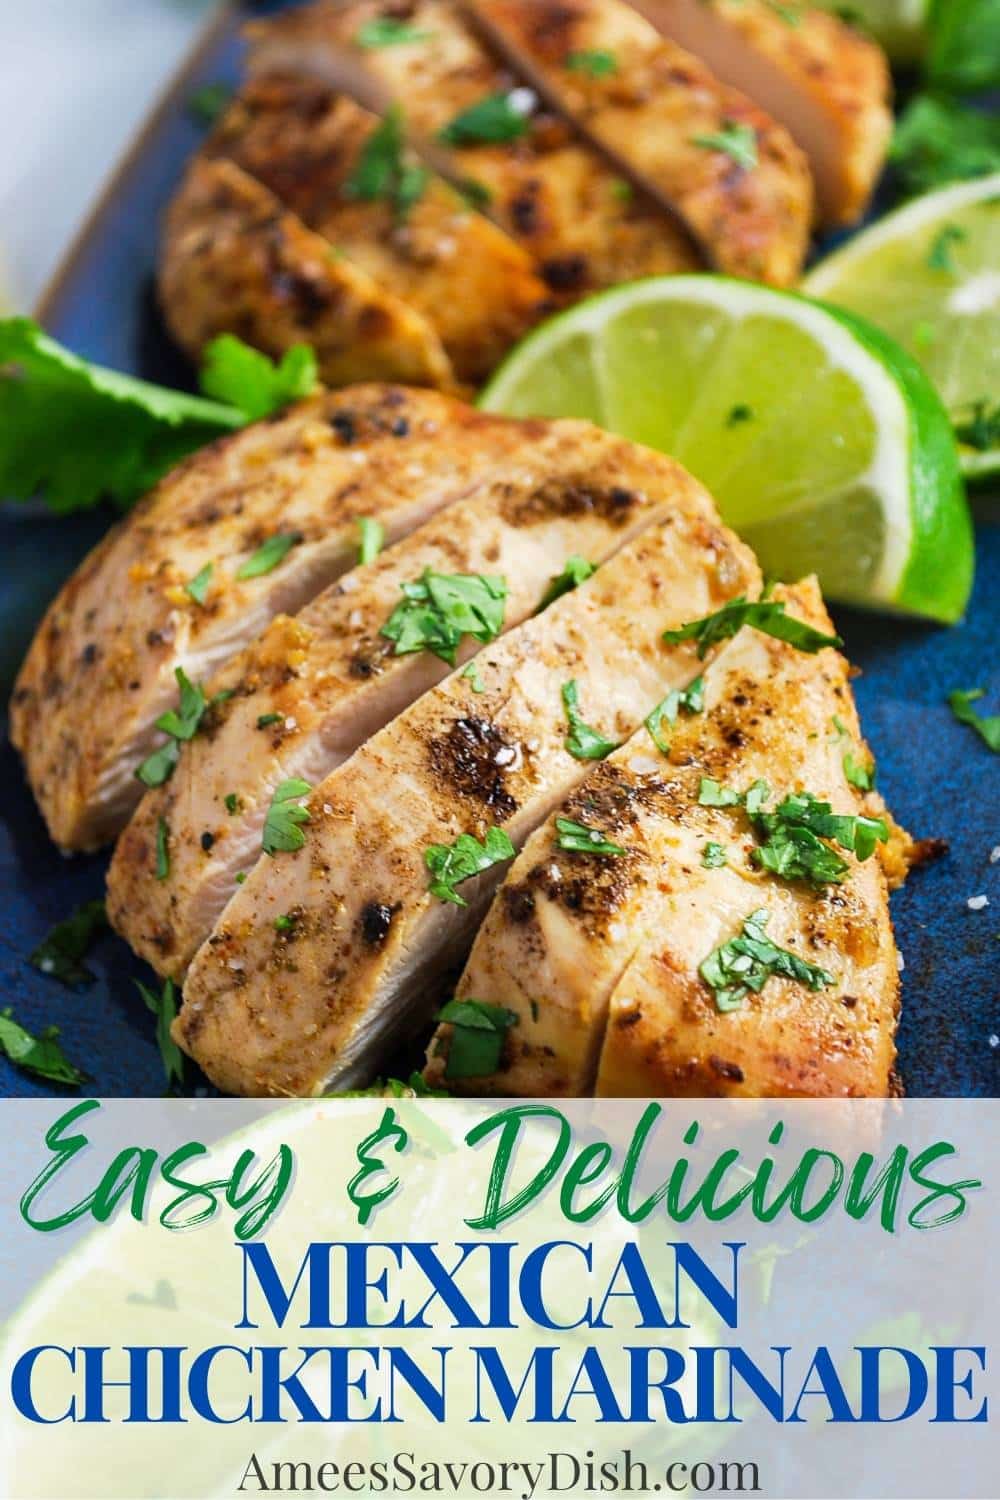 This quick and easy Mexican Chicken Marinade recipe is made with simple ingredients yet packed with zesty, herbaceous, and smoky flavors. via @Ameessavorydish